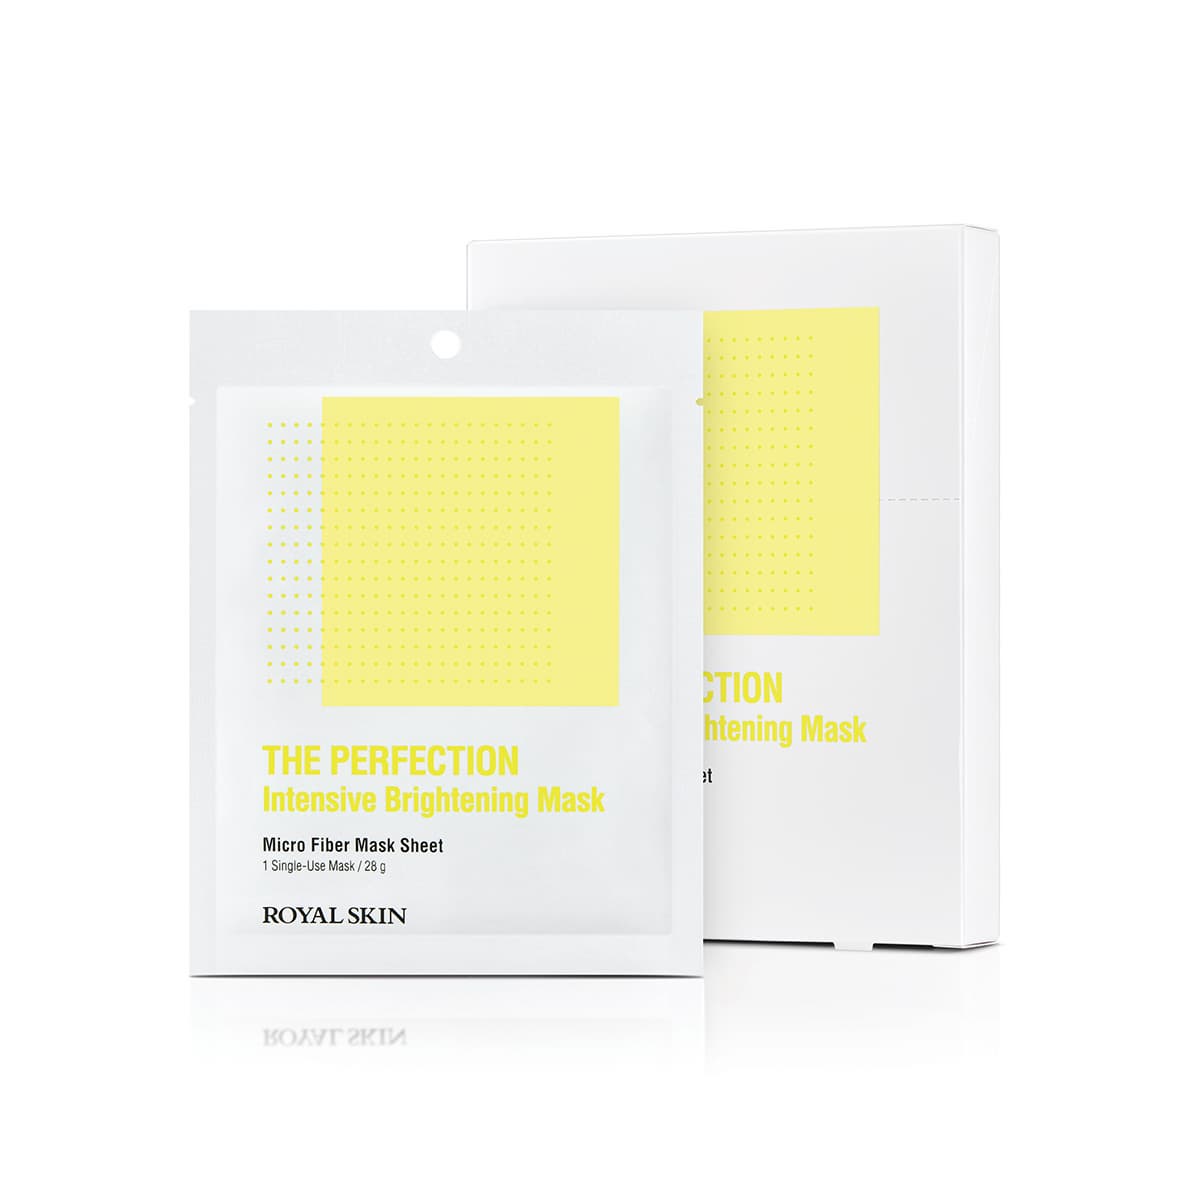 ROYAL SKIN THE PERFECTION Intensive Brightening Mask